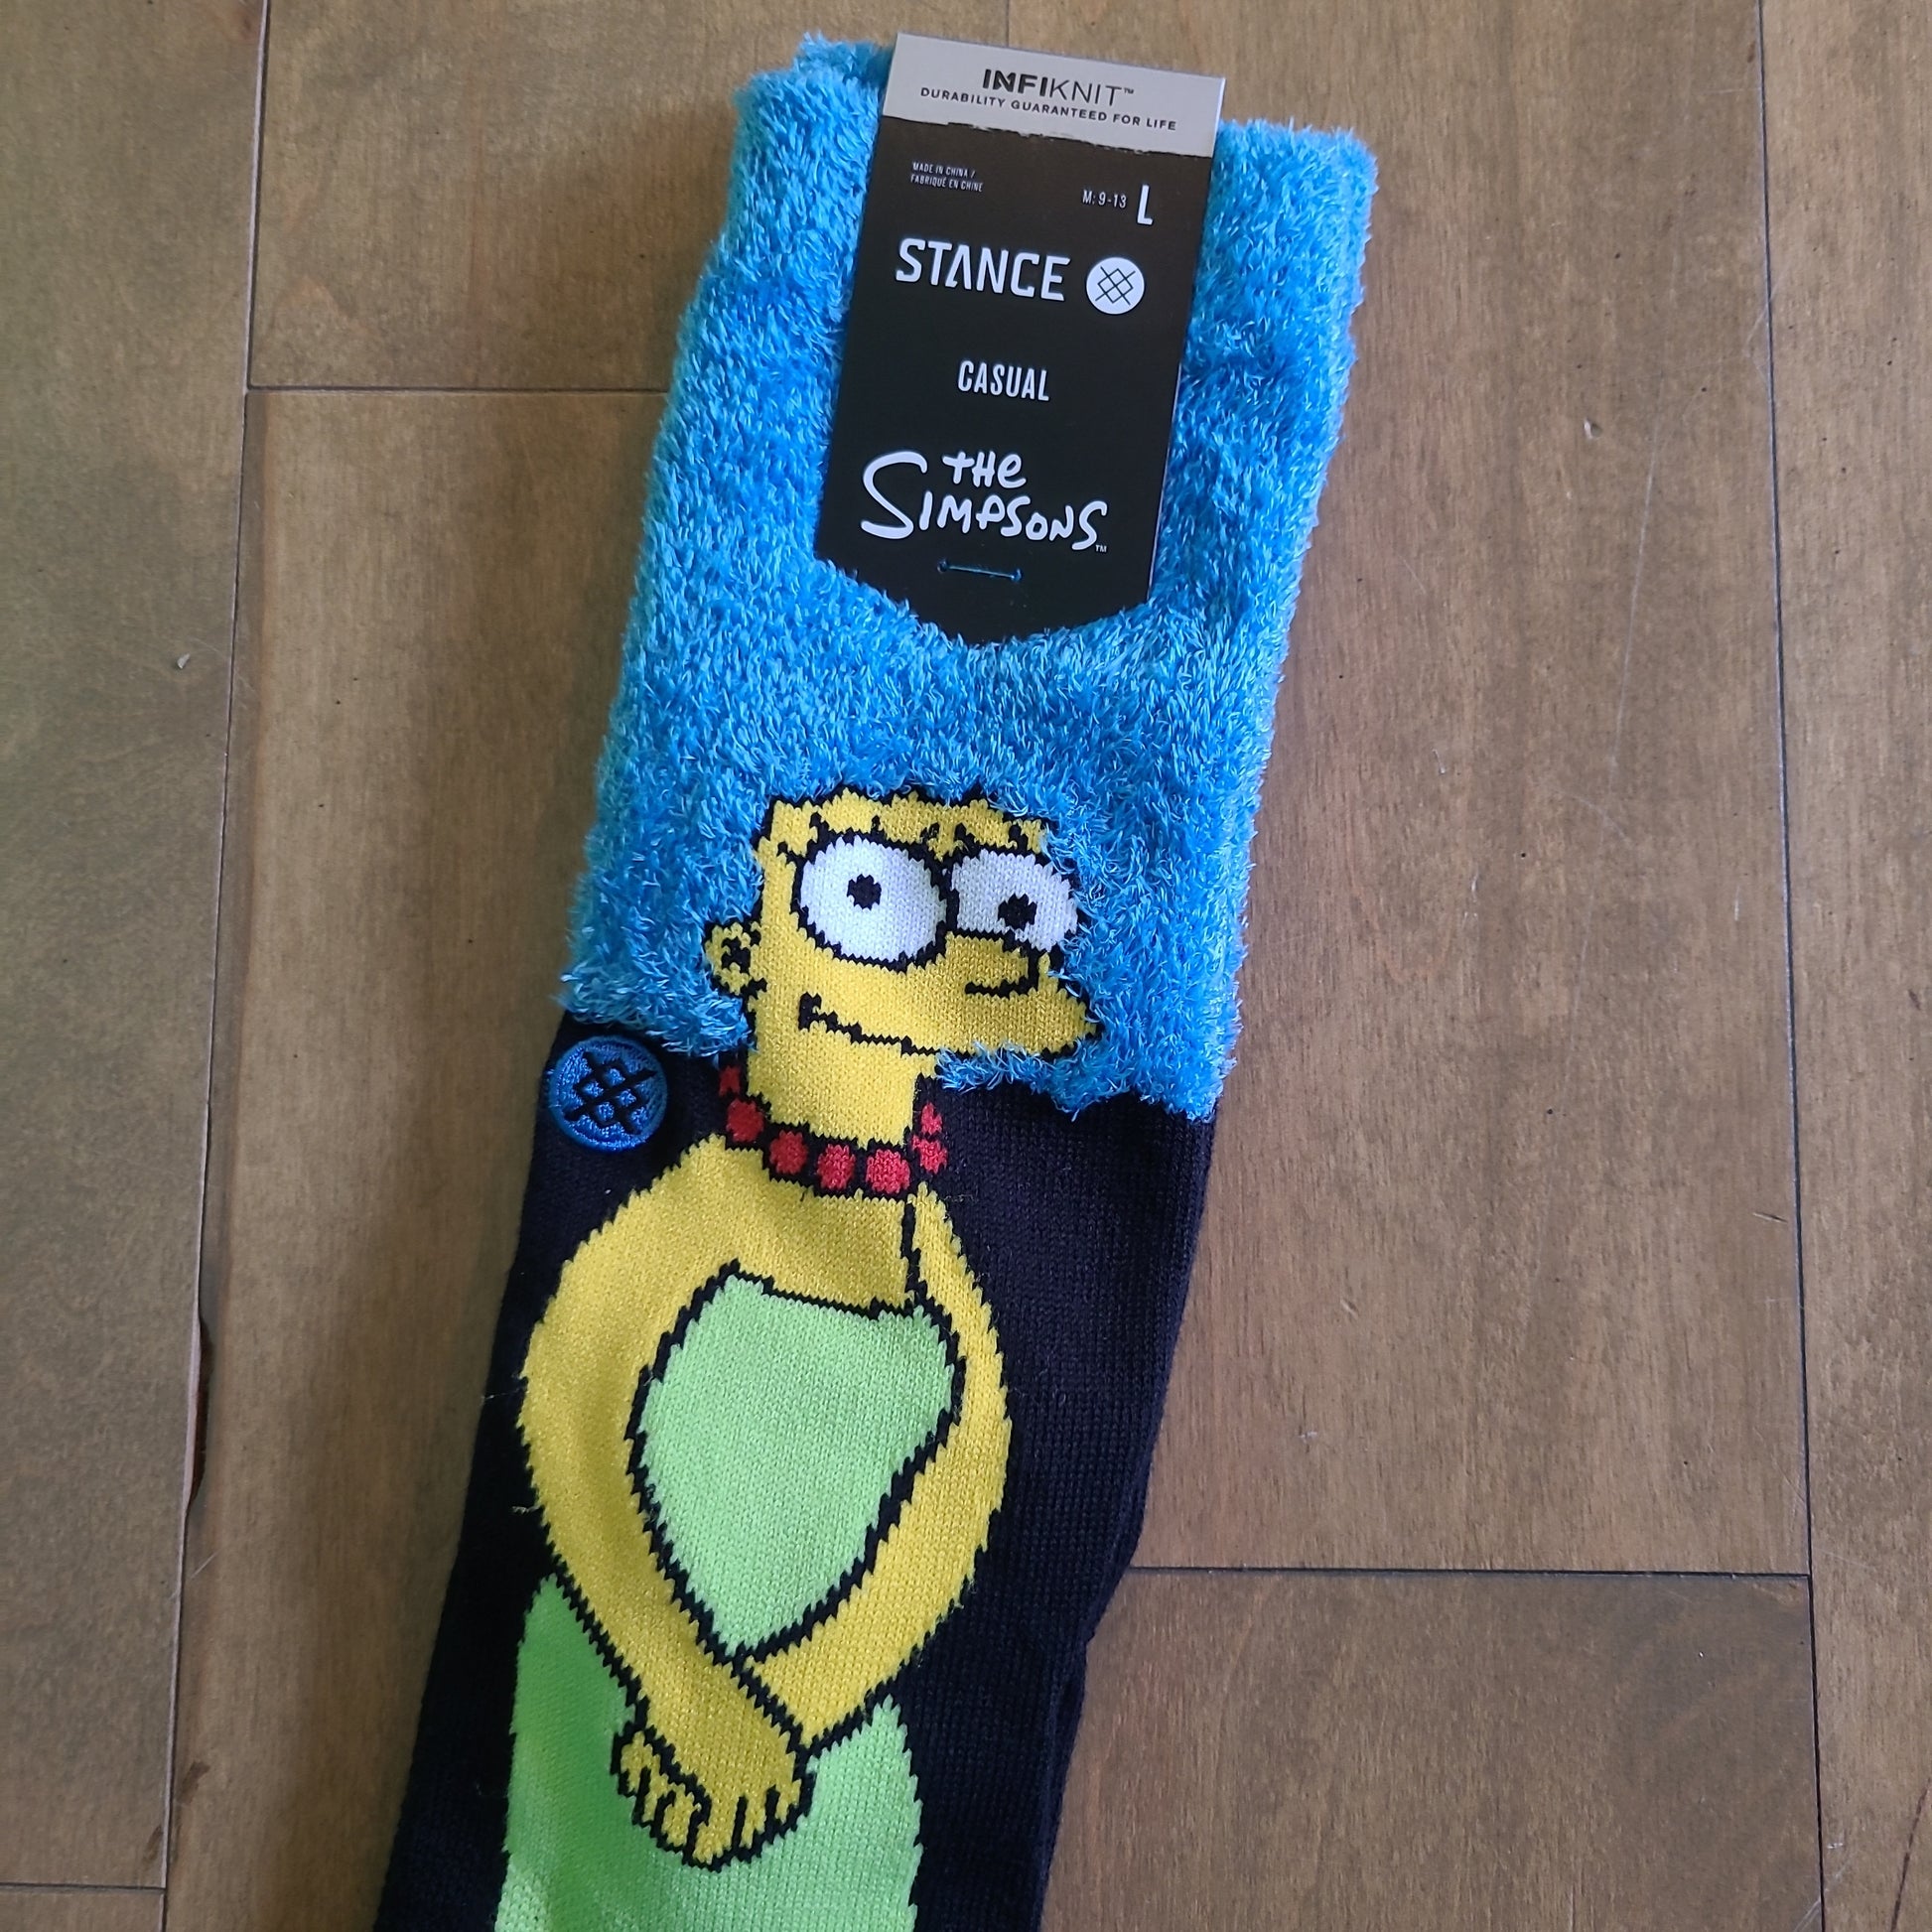 Stance The Simpsons Box Set